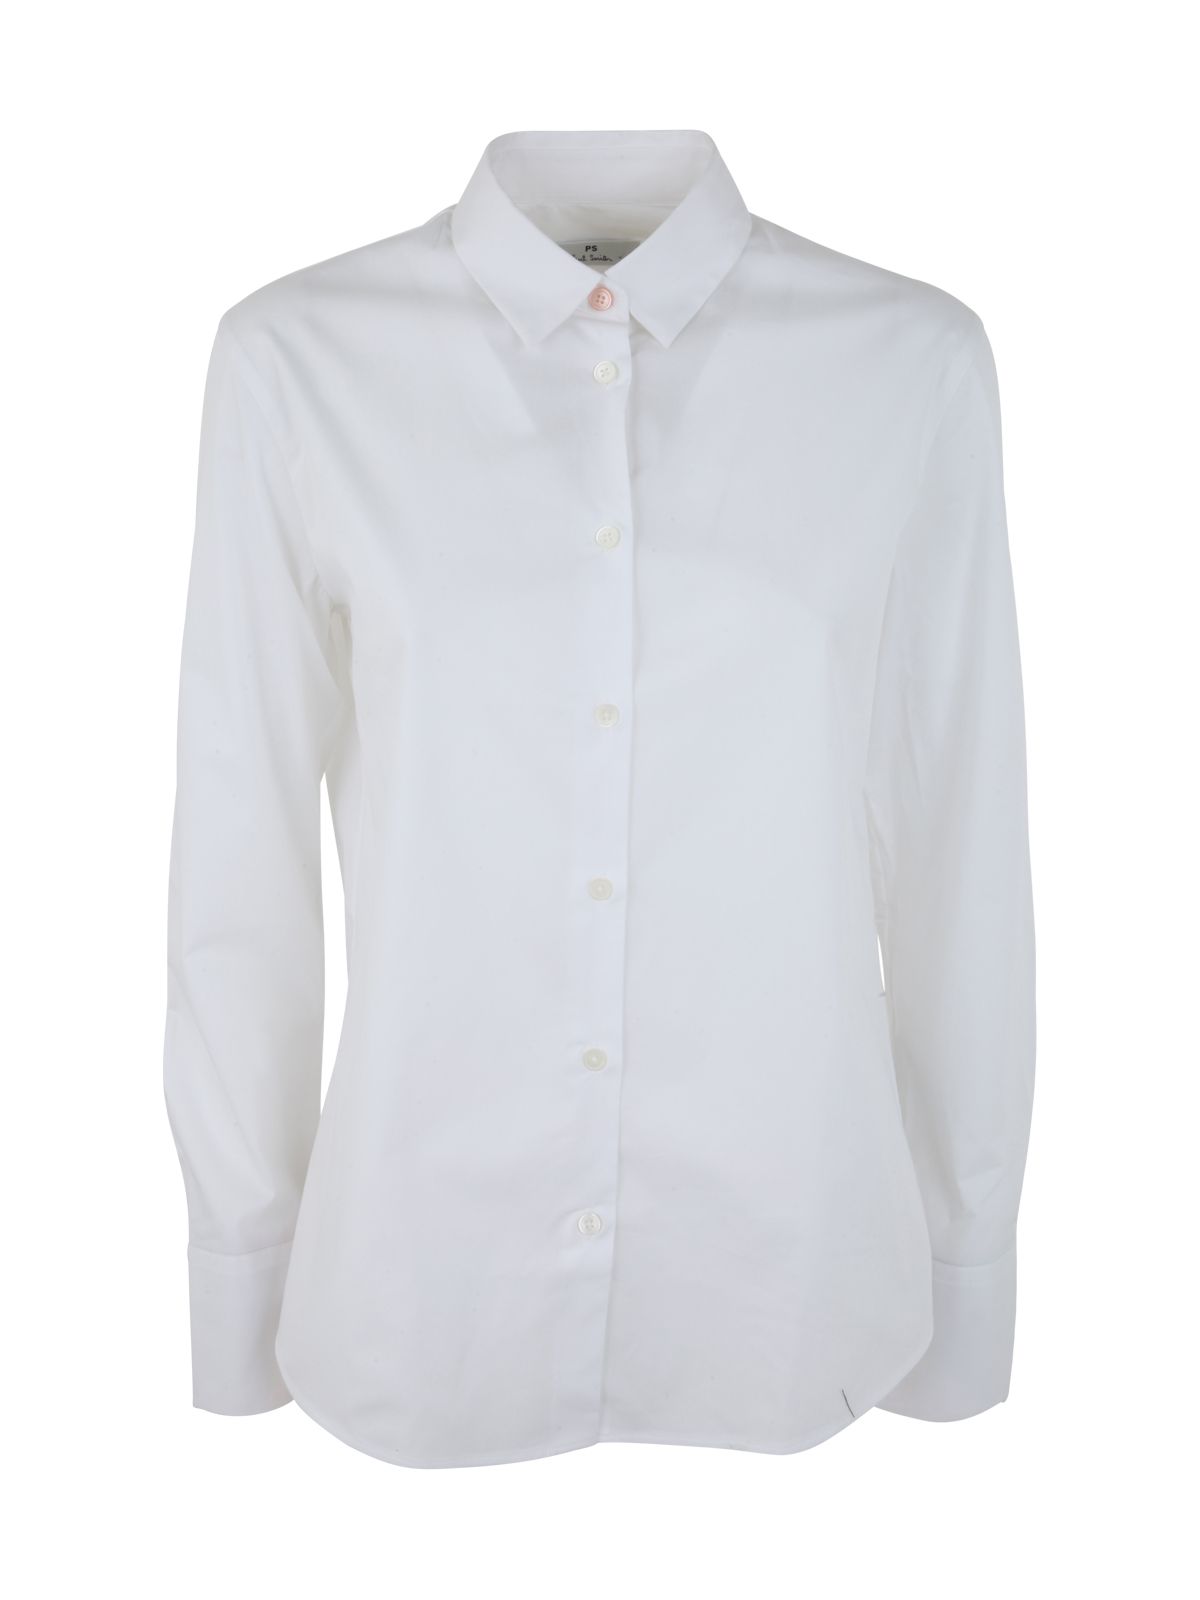 PS BY PAUL SMITH WOMEN SHIRTS: BLOUSE W/ LONG SLEEVES,W2R019BBK21598